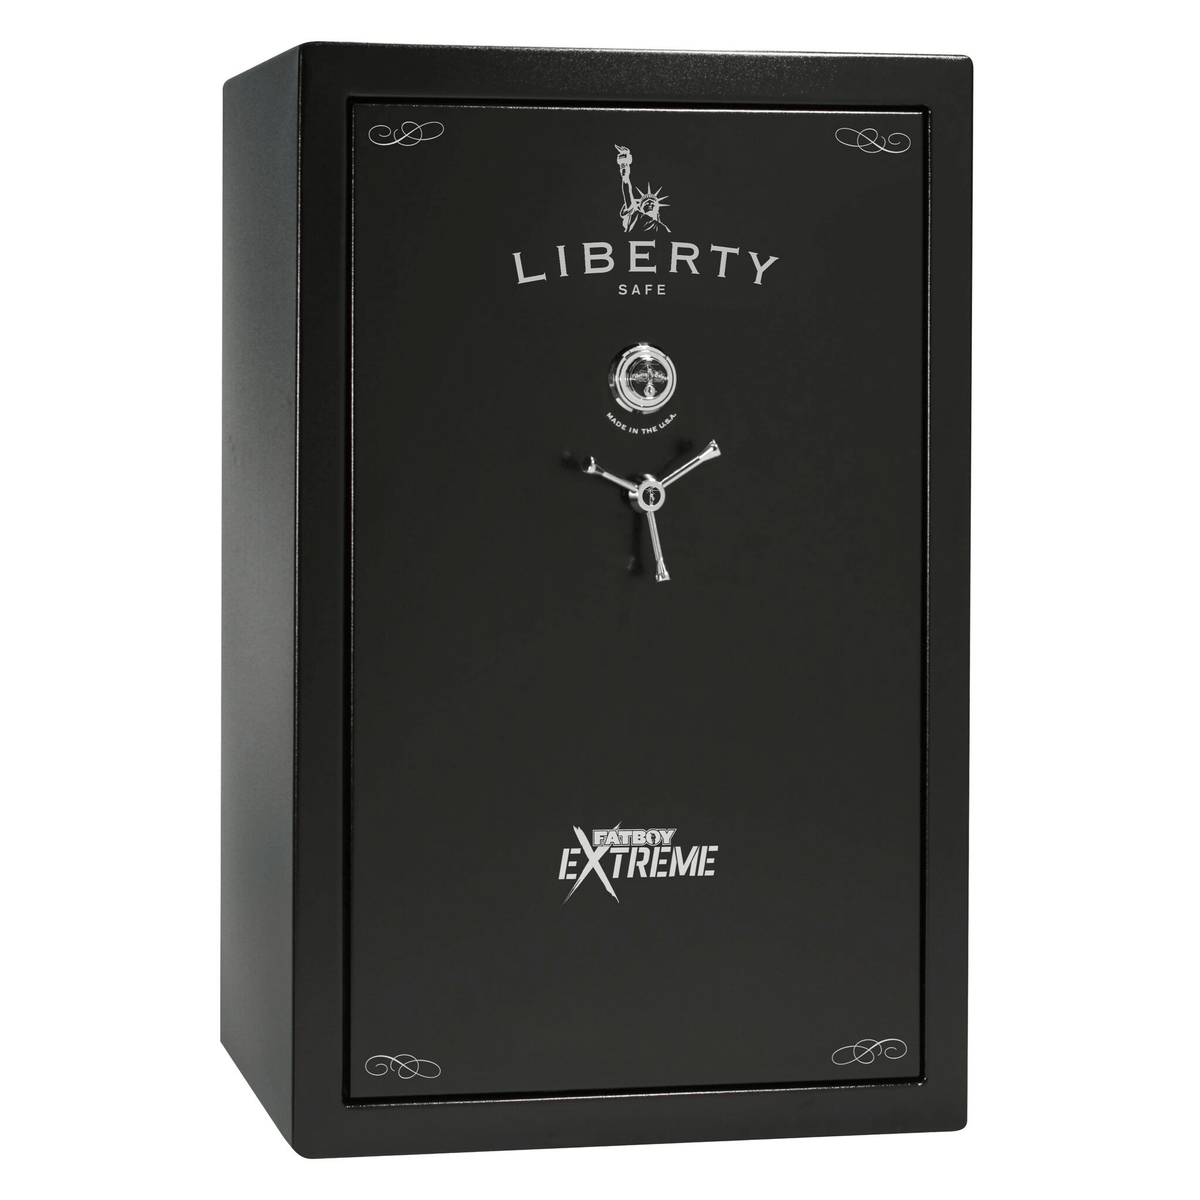 Fatboy Extreme Series | Level 5 Security | 110 Minute Fire Protection | Liberty Safe Norcal.